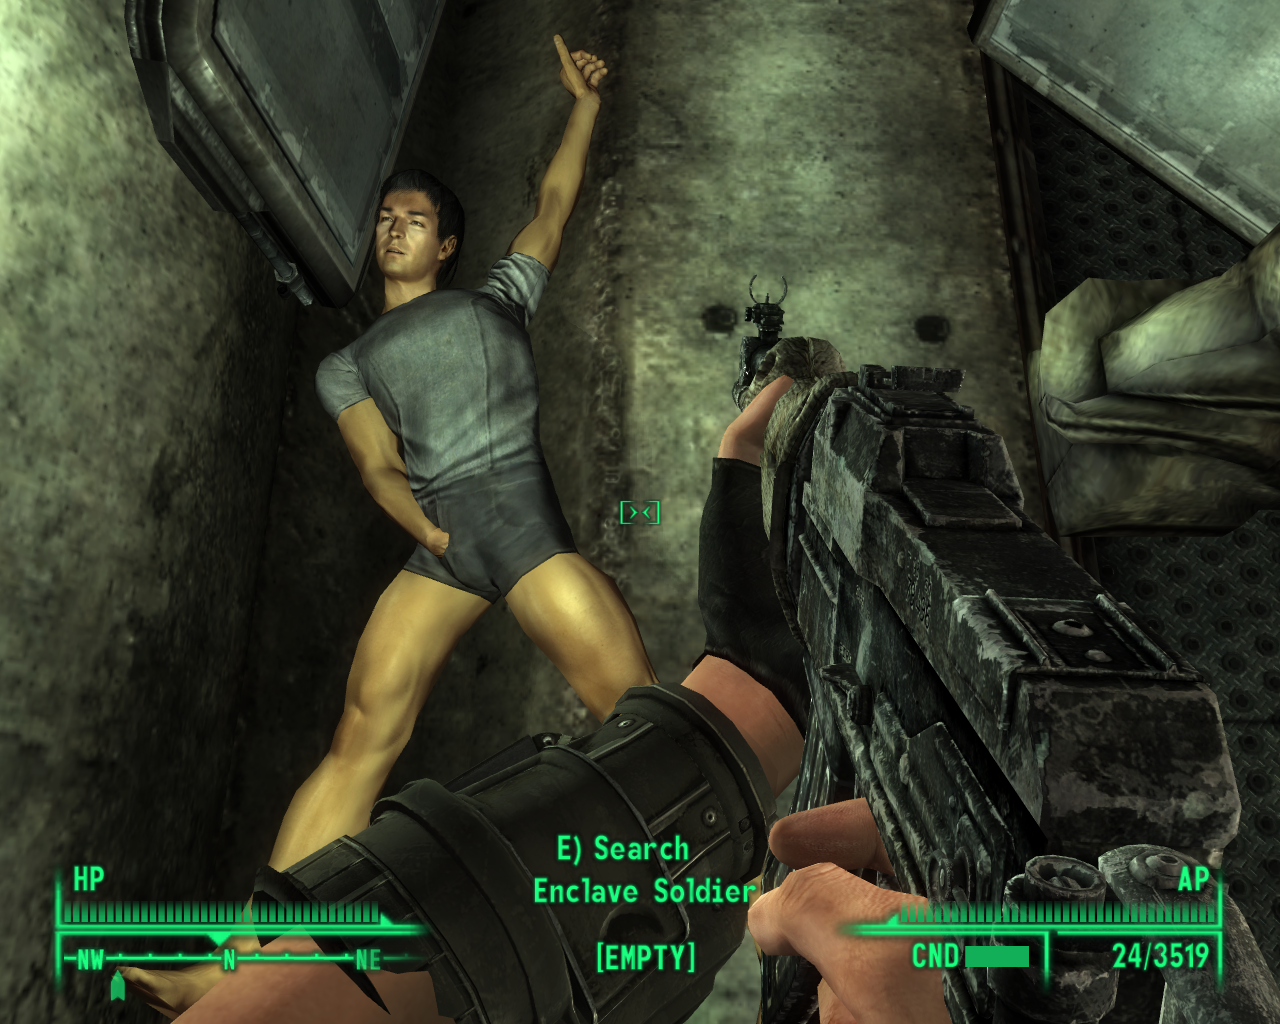 Strange dead body in a video game that looks like he is dancing and grabbing his crotch.